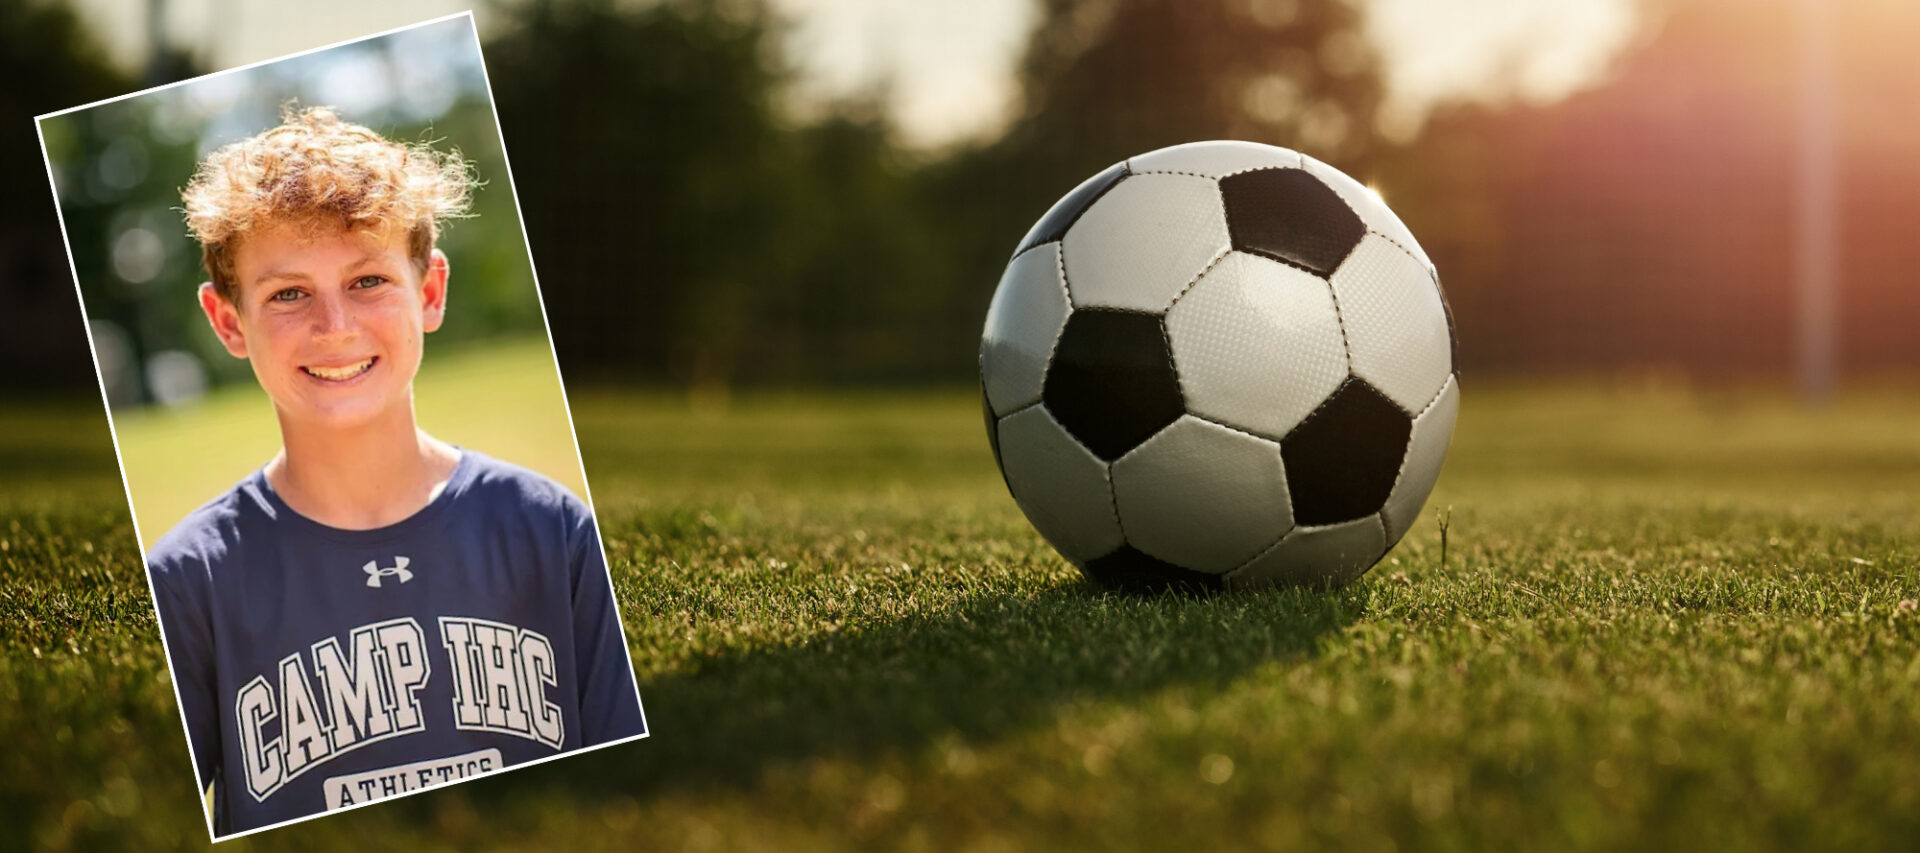 A photo of Blake to the left in the foreground. In the background, a photo of a soccer ball on a grassy field.